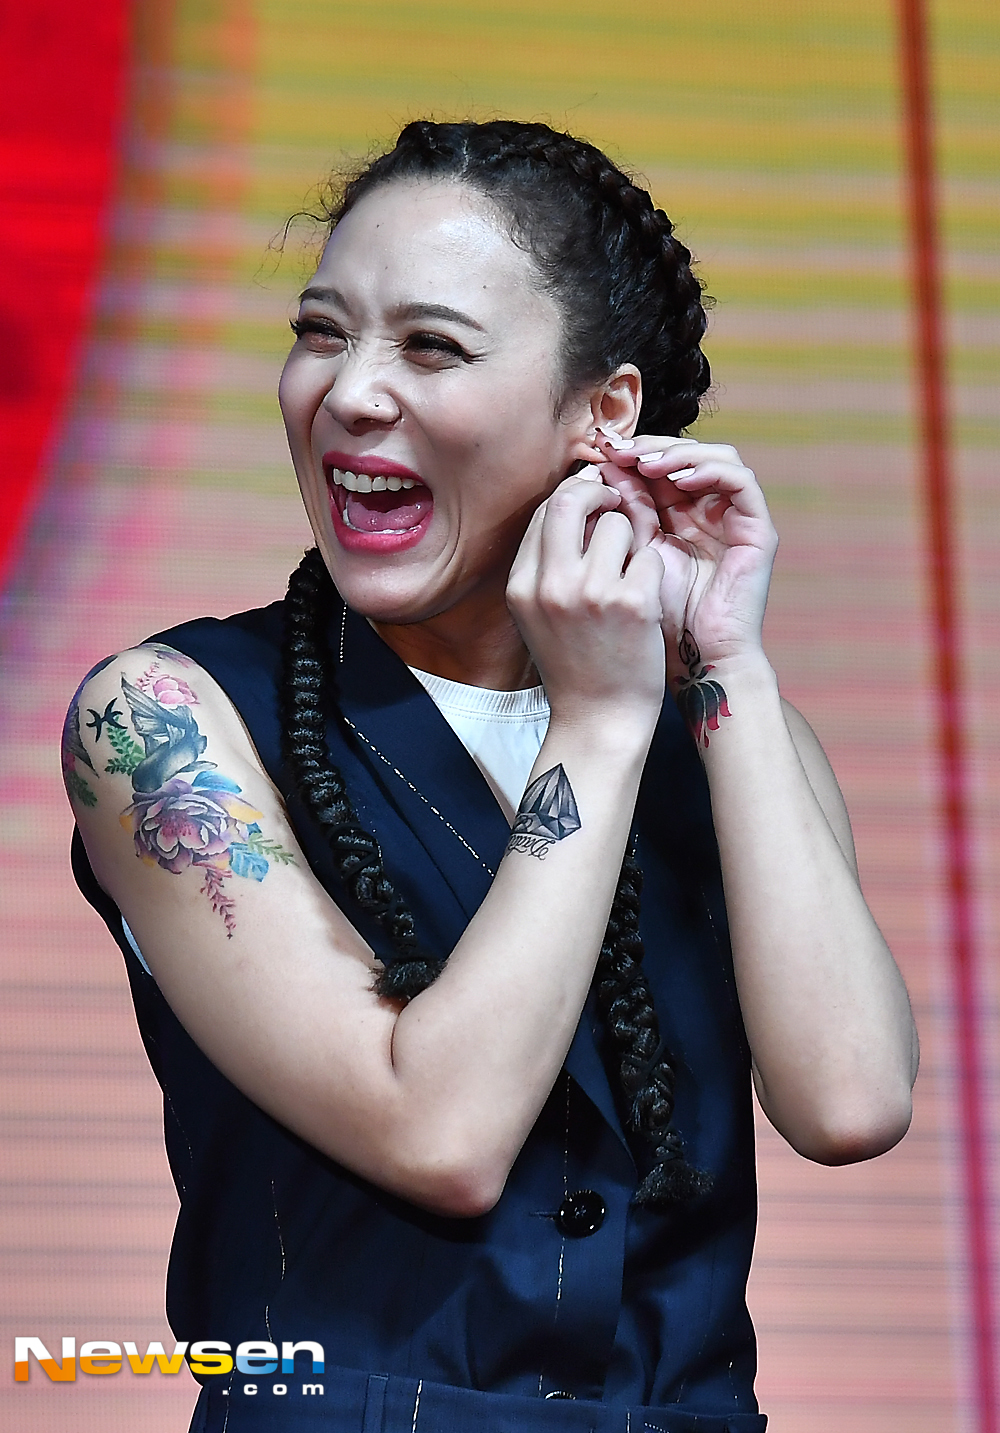 <p>Yoon Mi-rae solo album release commemorative Pitch was held at Jesus 24 Live Hall in Guanyin-dong, Gwangjin-ku, September 5th afternoon</p><p>This day Yoon Mi-rae fixes Earring in Pitch.</p><p>Meanwhile, Yoon Mi-rae will showcase the first stage of Yu · And · Beauty from KBS 2 Music Bank on the 6th. Yoon Mi-rae announces a solo album and appeared on the music ranking program for the first time in nine years since no way to leave in 2009.</p>